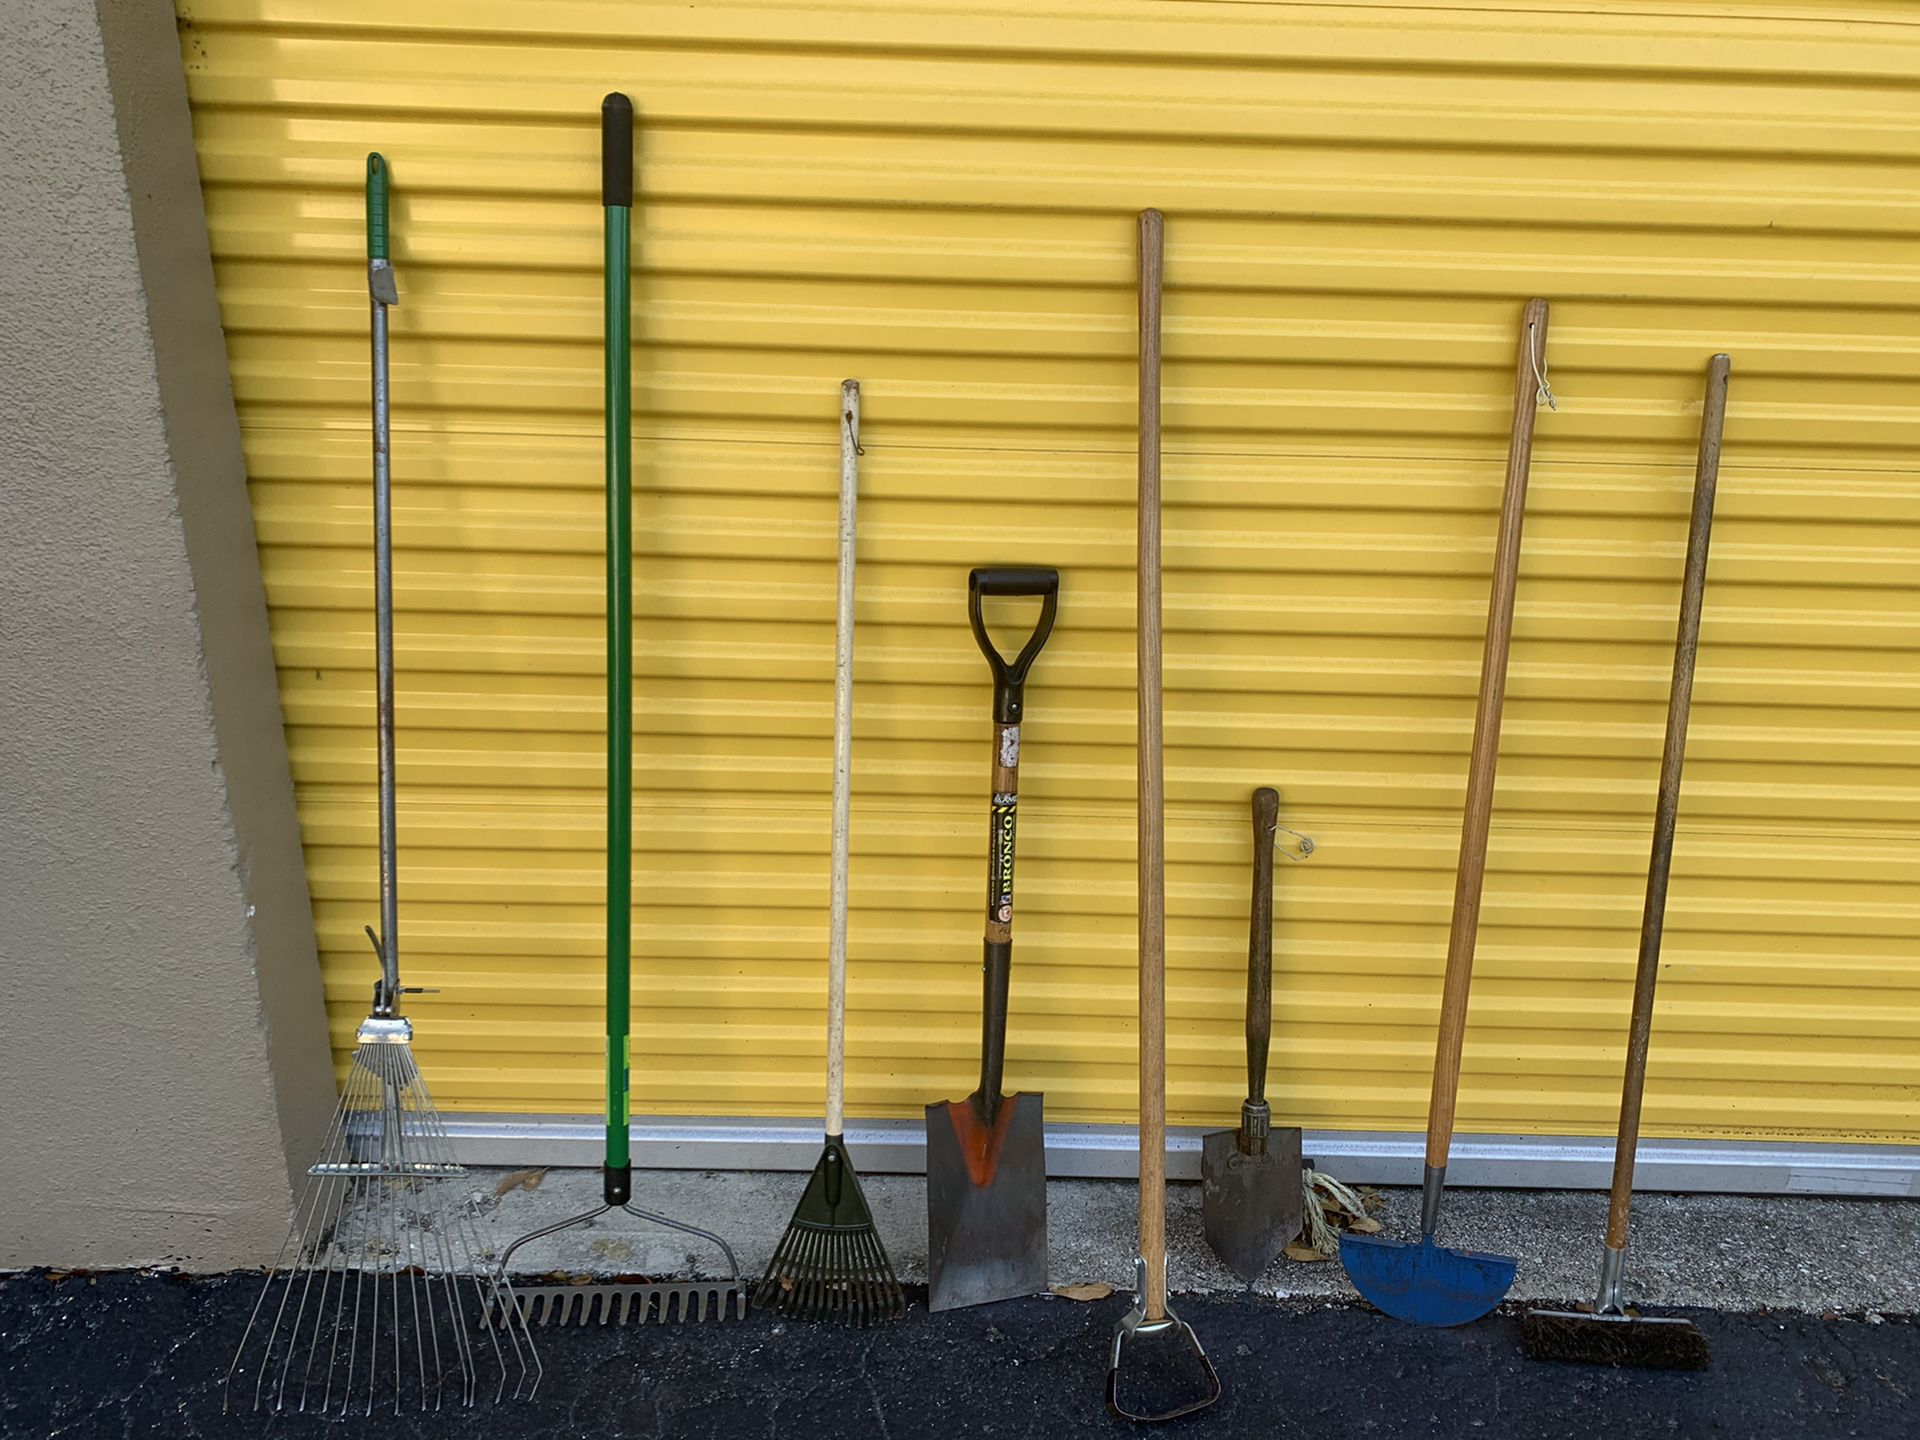 Shovels rakes and other gardening tools everything for $10